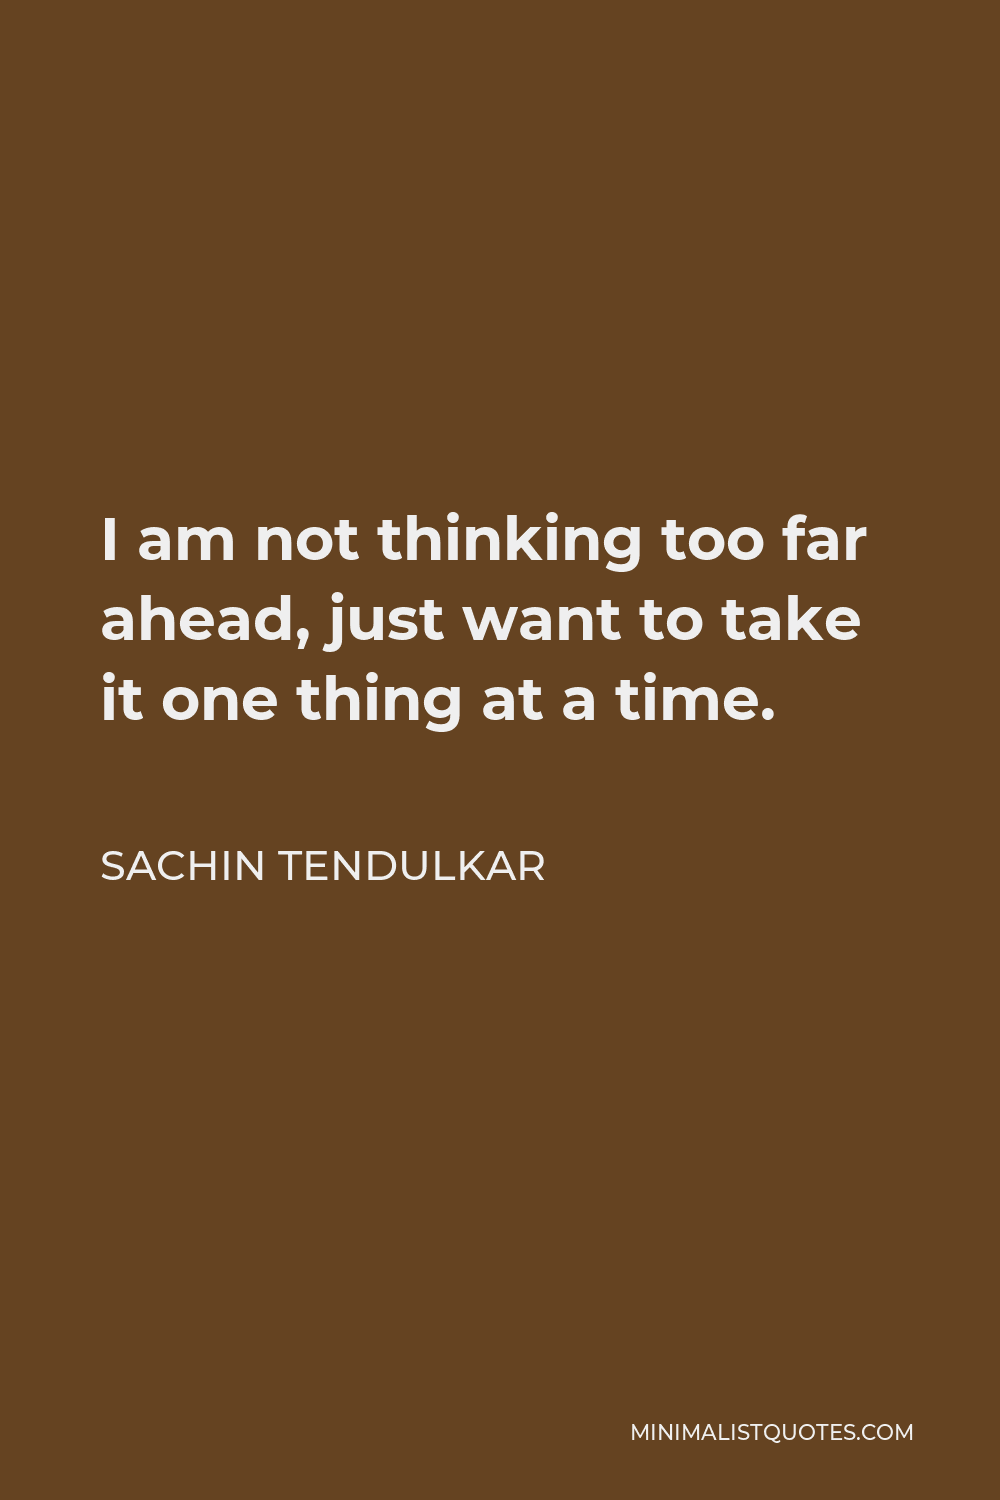 Sachin Tendulkar Quote - I am not thinking too far ahead, just want to take it one thing at a time.